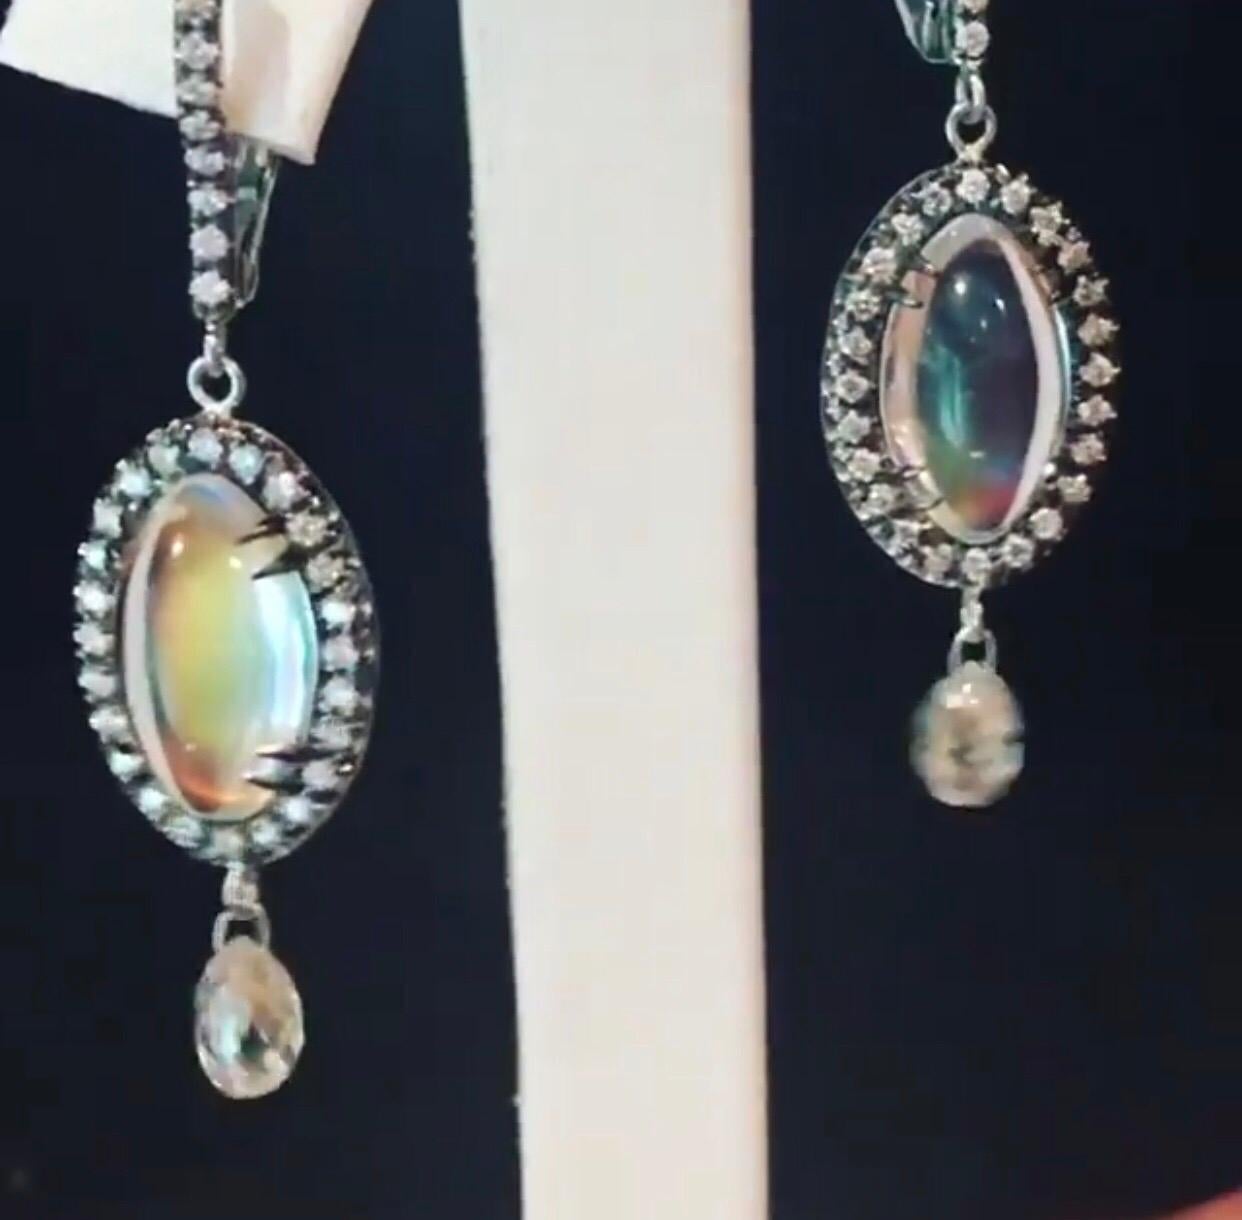 Contemporary Bella Campbell/Campbellian Rainbow Moonstone Earrings with Diamond Briolette